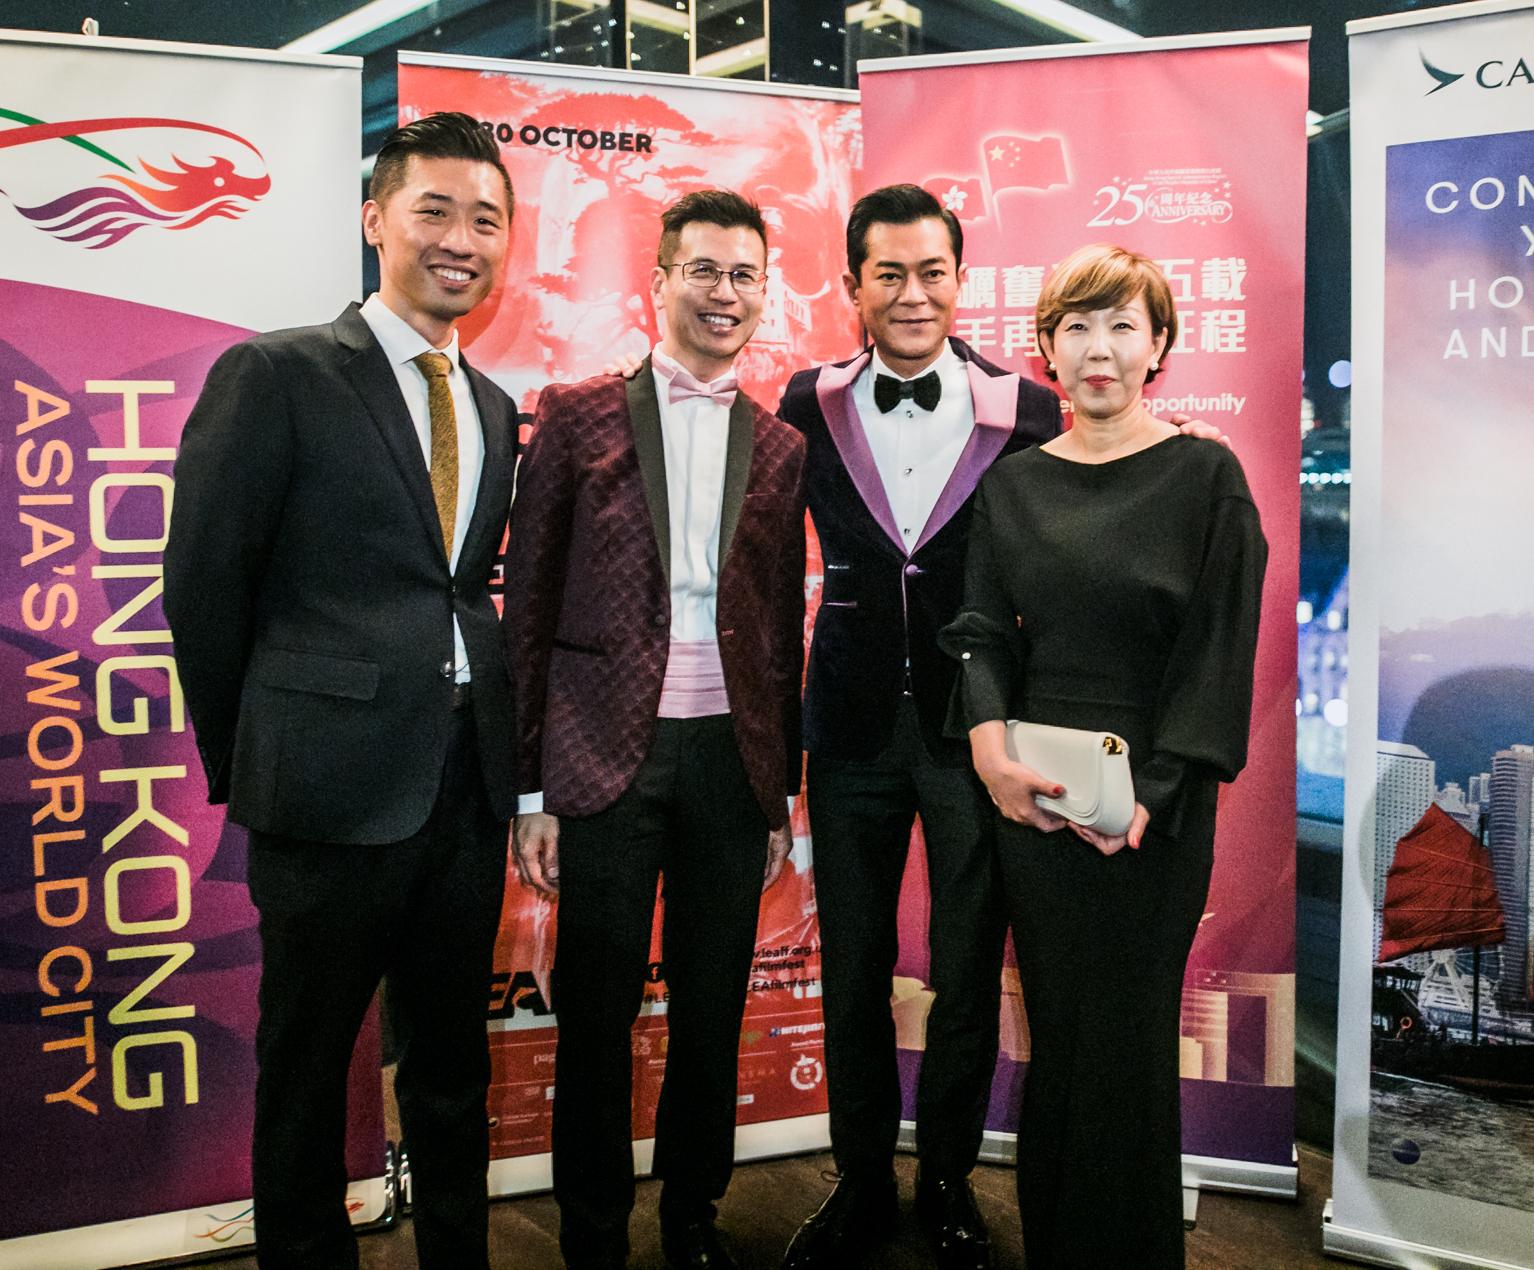 To commemorate the 25th anniversary of the establishment of the Hong Kong Special Administrative Region, the Hong Kong Economic and Trade Office, London (London ETO) supported the London East Asia Film Festival, showcasing seven Hong Kong films in London from October 19 to 30 (London time).   Photo shows (from left) the Regional General Manager for Europe of Cathay Pacific Airways, Mr Kinto Chan; the Director-General of the London ETO, Mr Gilford Law; Hong Kong actor Louis Koo, and the Festival Director of London East Asia Film Festival, Ms Hye-jung Jeon, attending the post-closing gala reception themed "Hong Kong Night".  